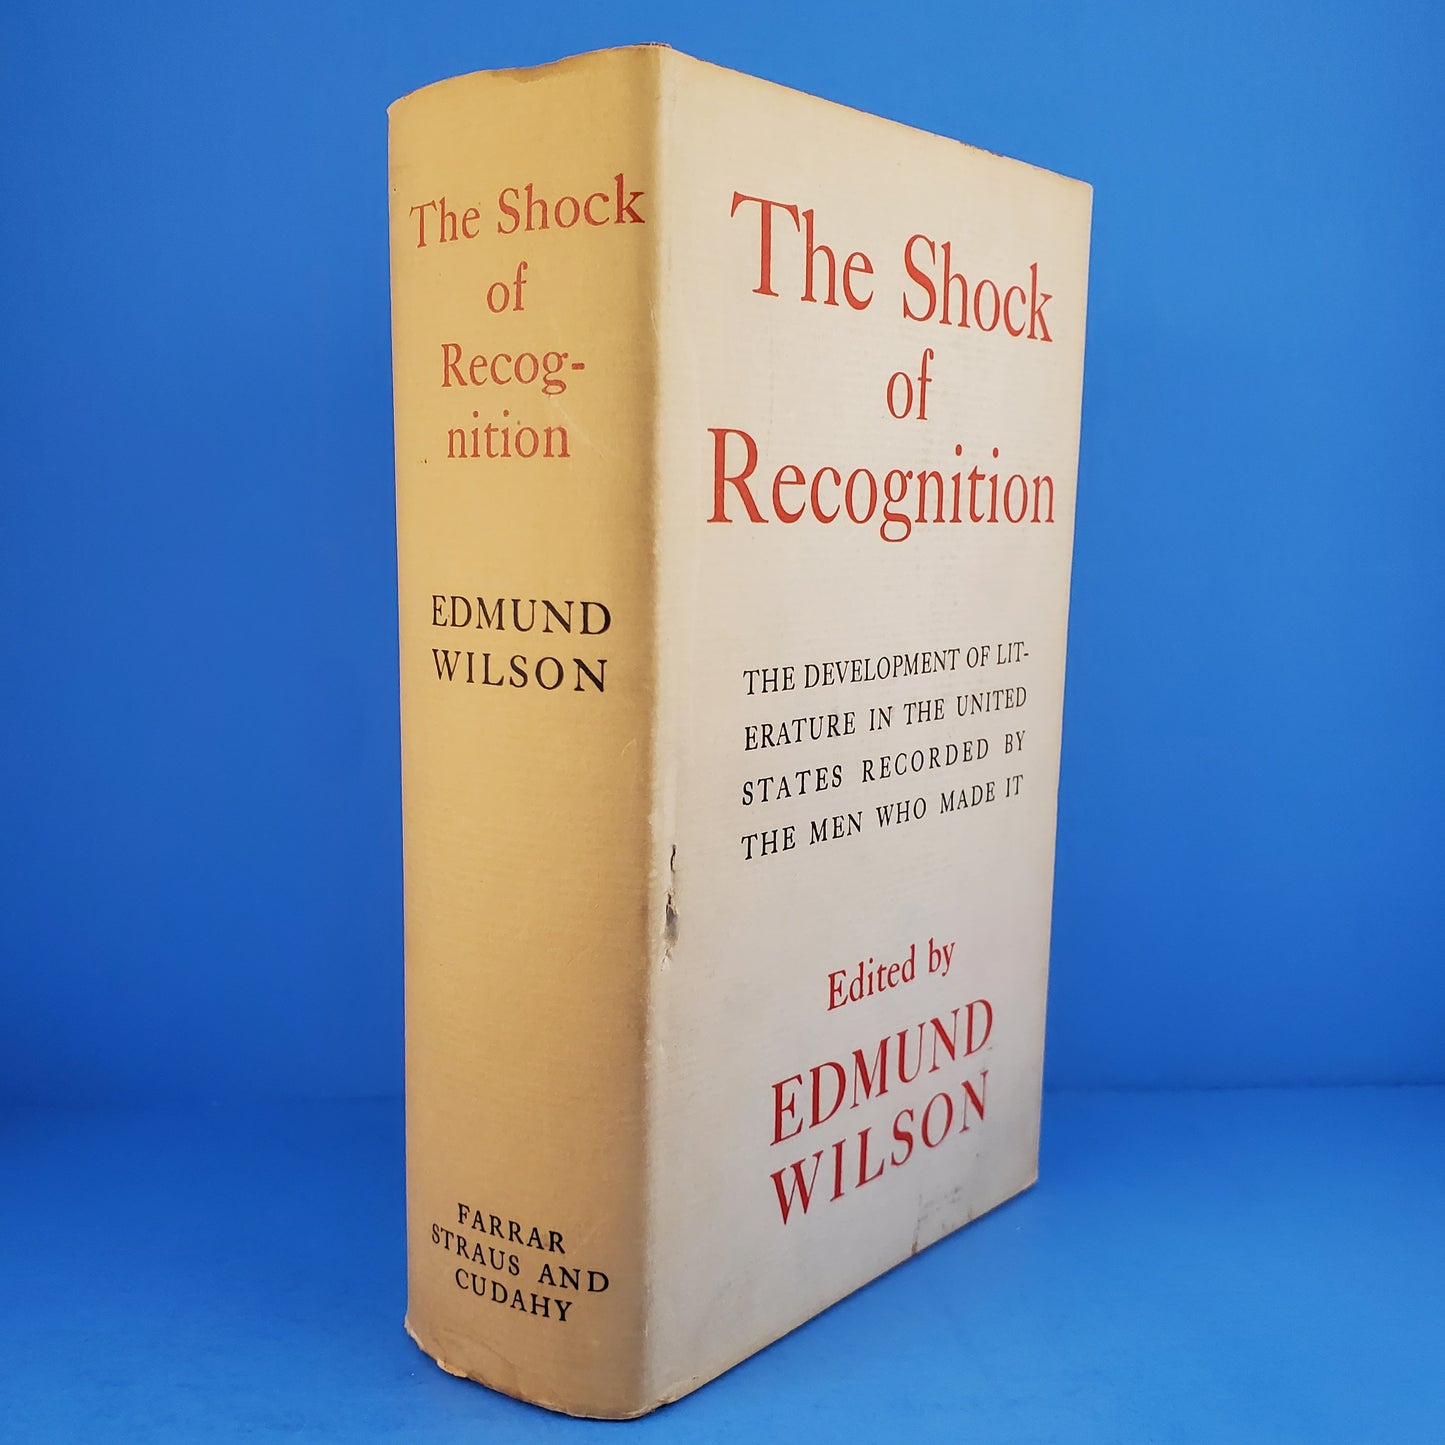 The Shock of Recognition: The Development of Literature in the US Recorded by the Men Who Made It